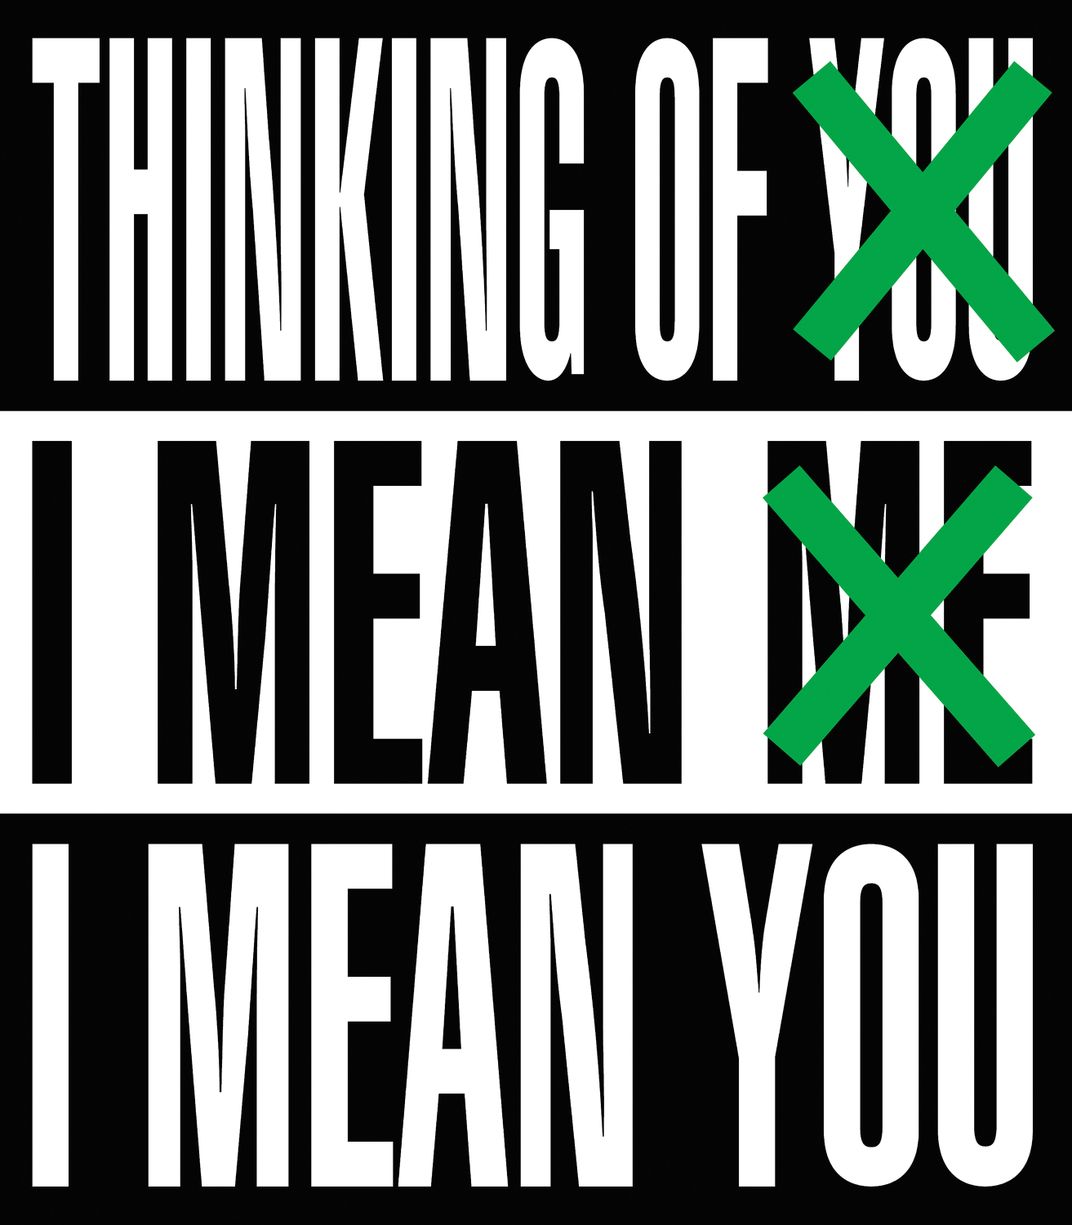 The words Thinking of You (X-ed out in green), I mean Me (X-ed out in green), I mean You, in black and white bold capitalized text on contrasting backgrounds